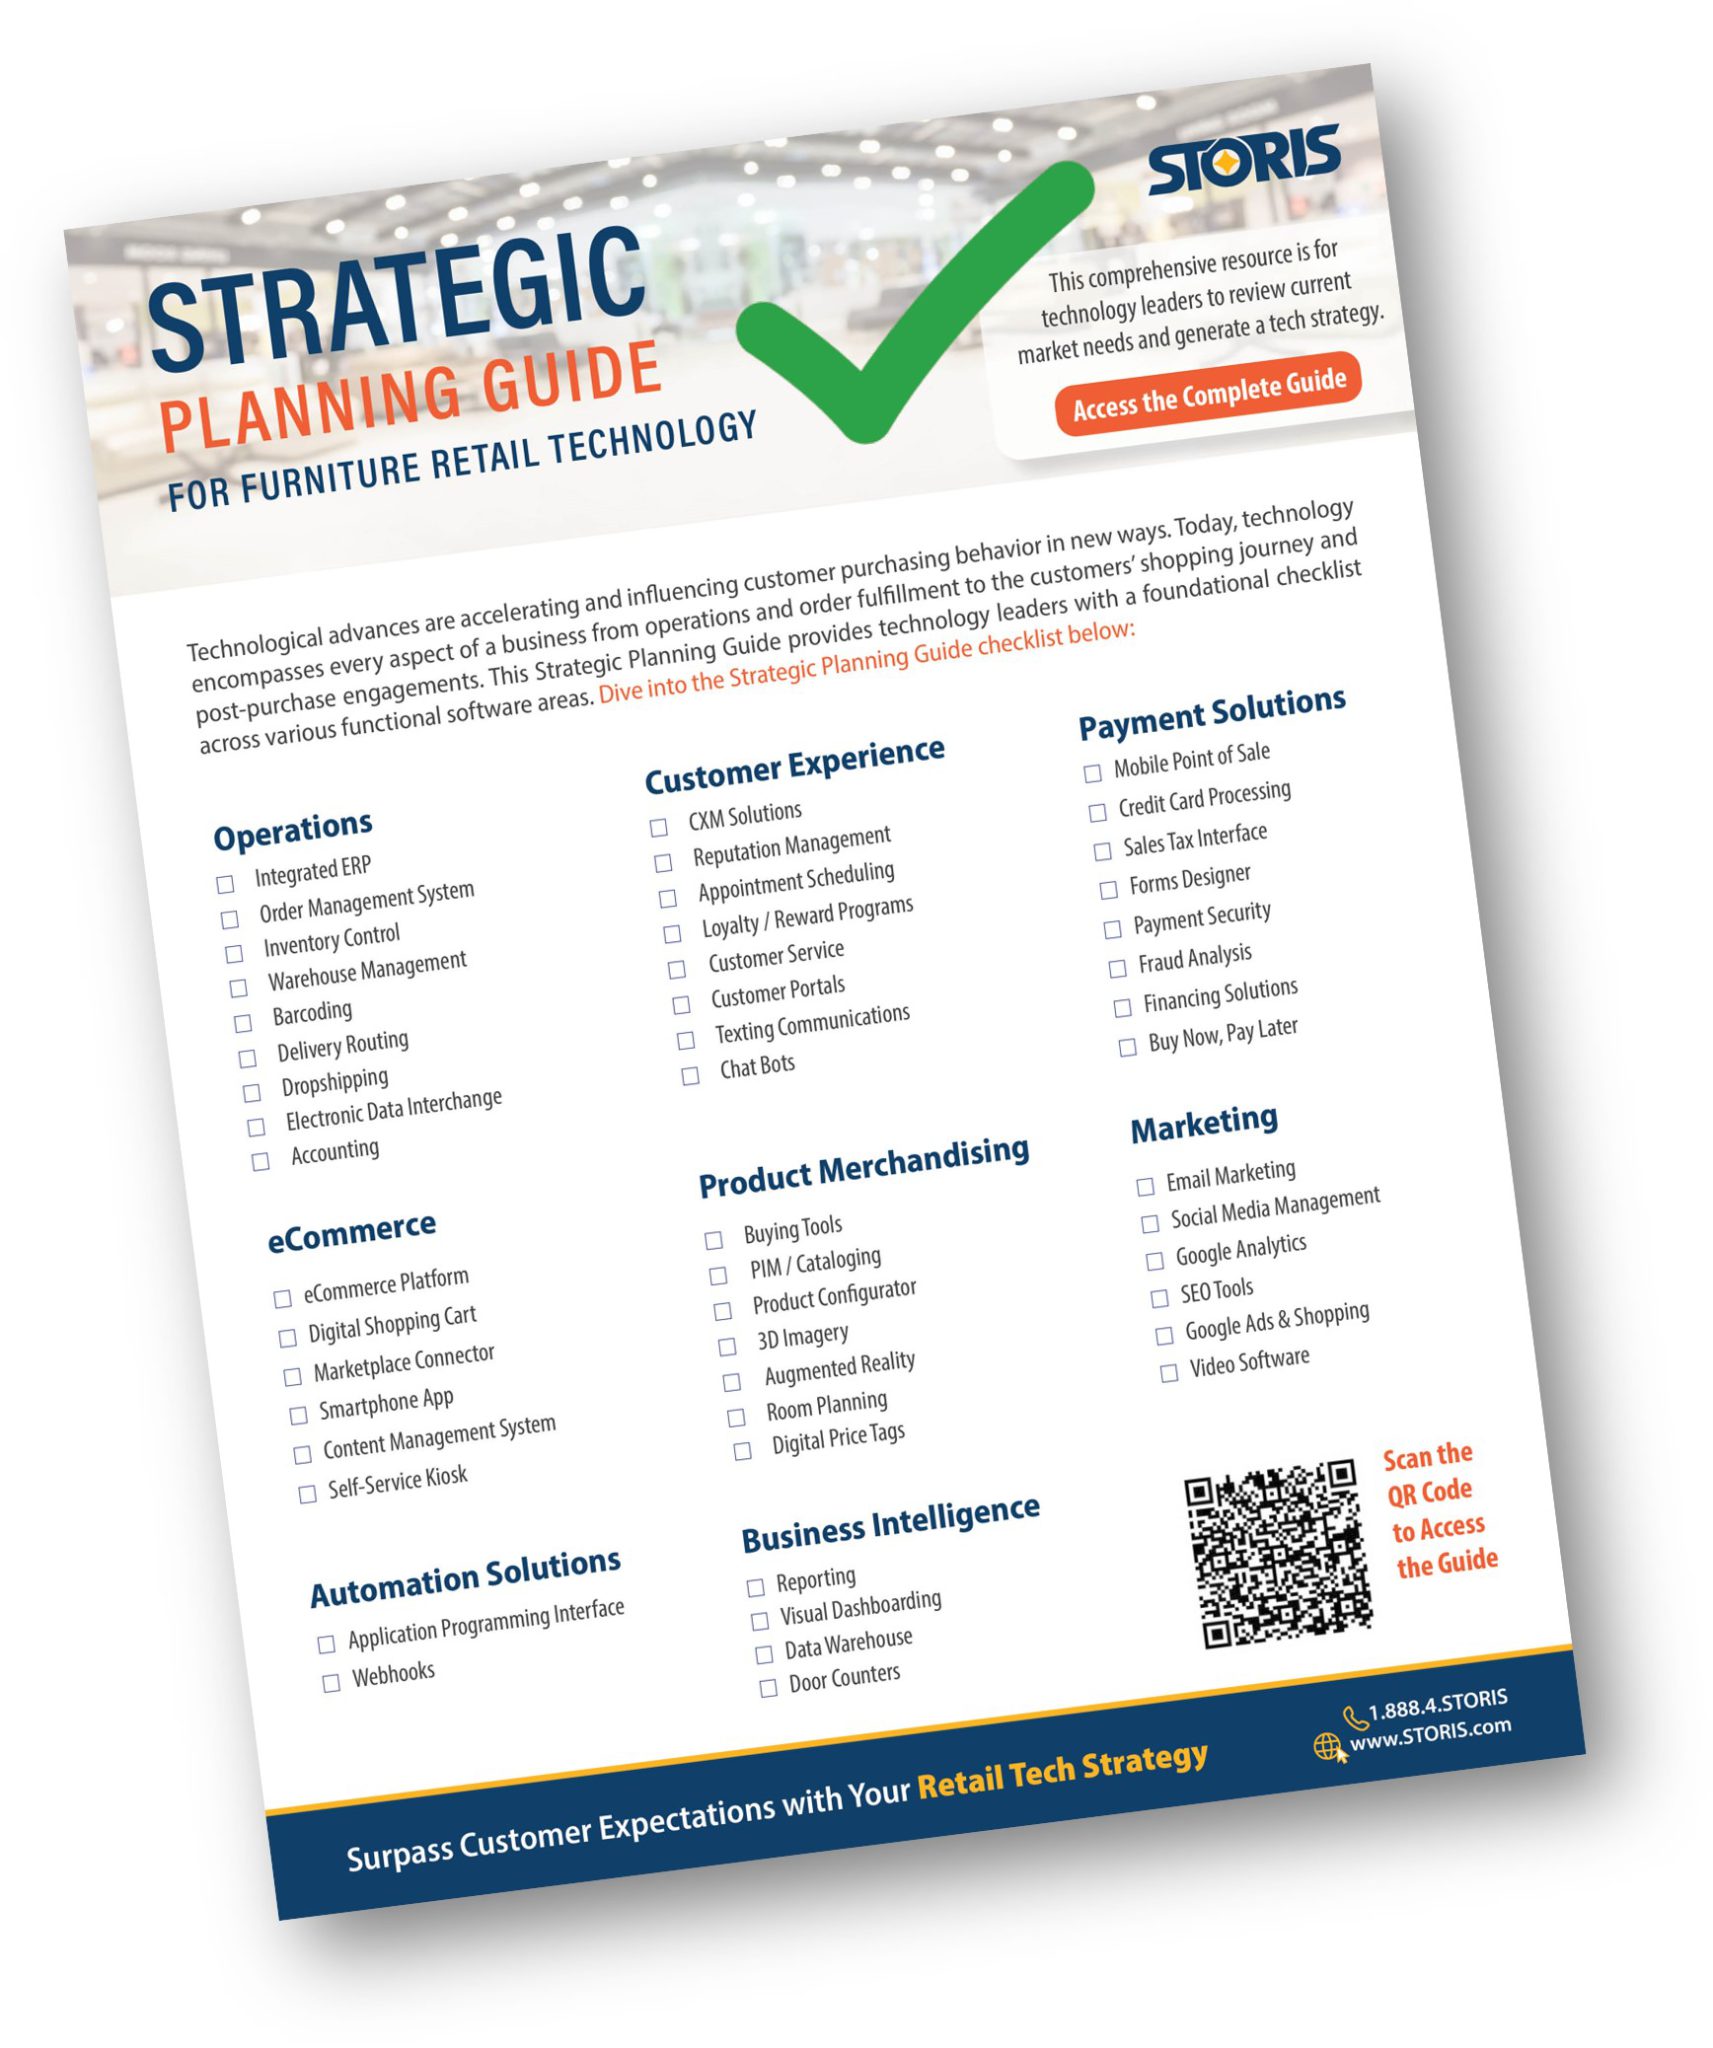 Strategic Planning Guide for Furniture Retail Technology - Checklist Edition